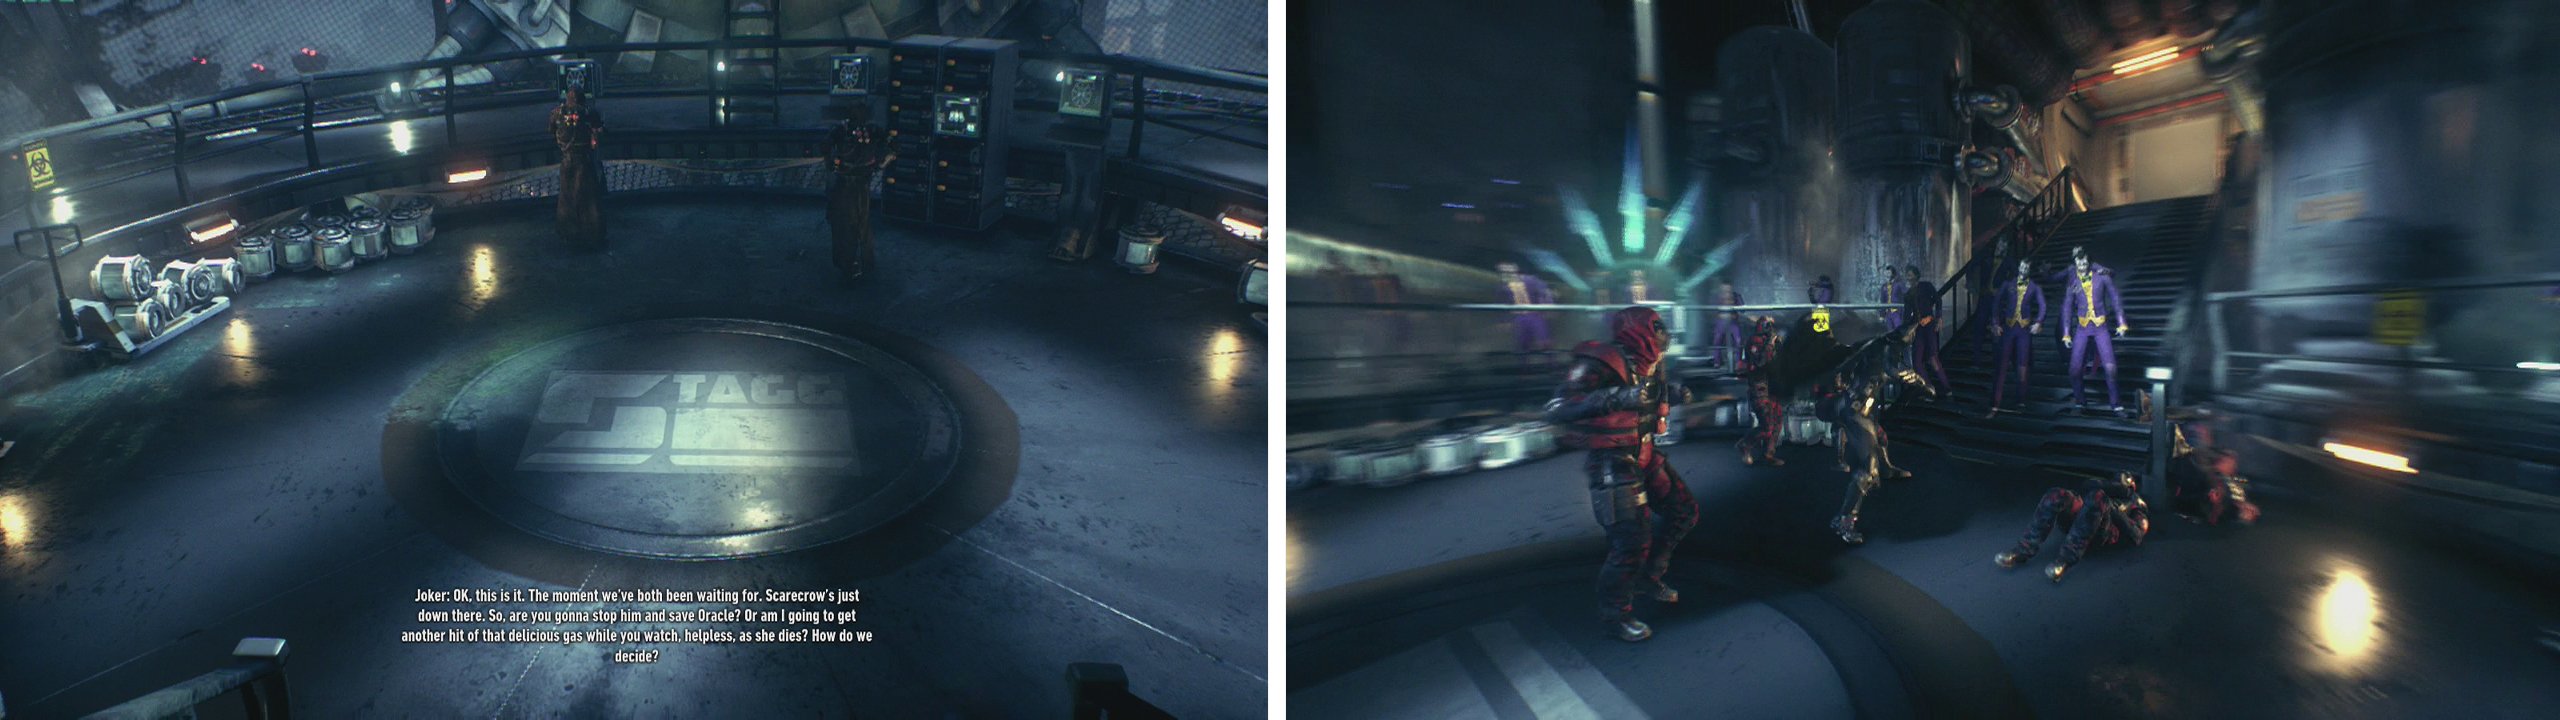 Approach either figure for a scene (left) and then fight off the enemies that appear (right).